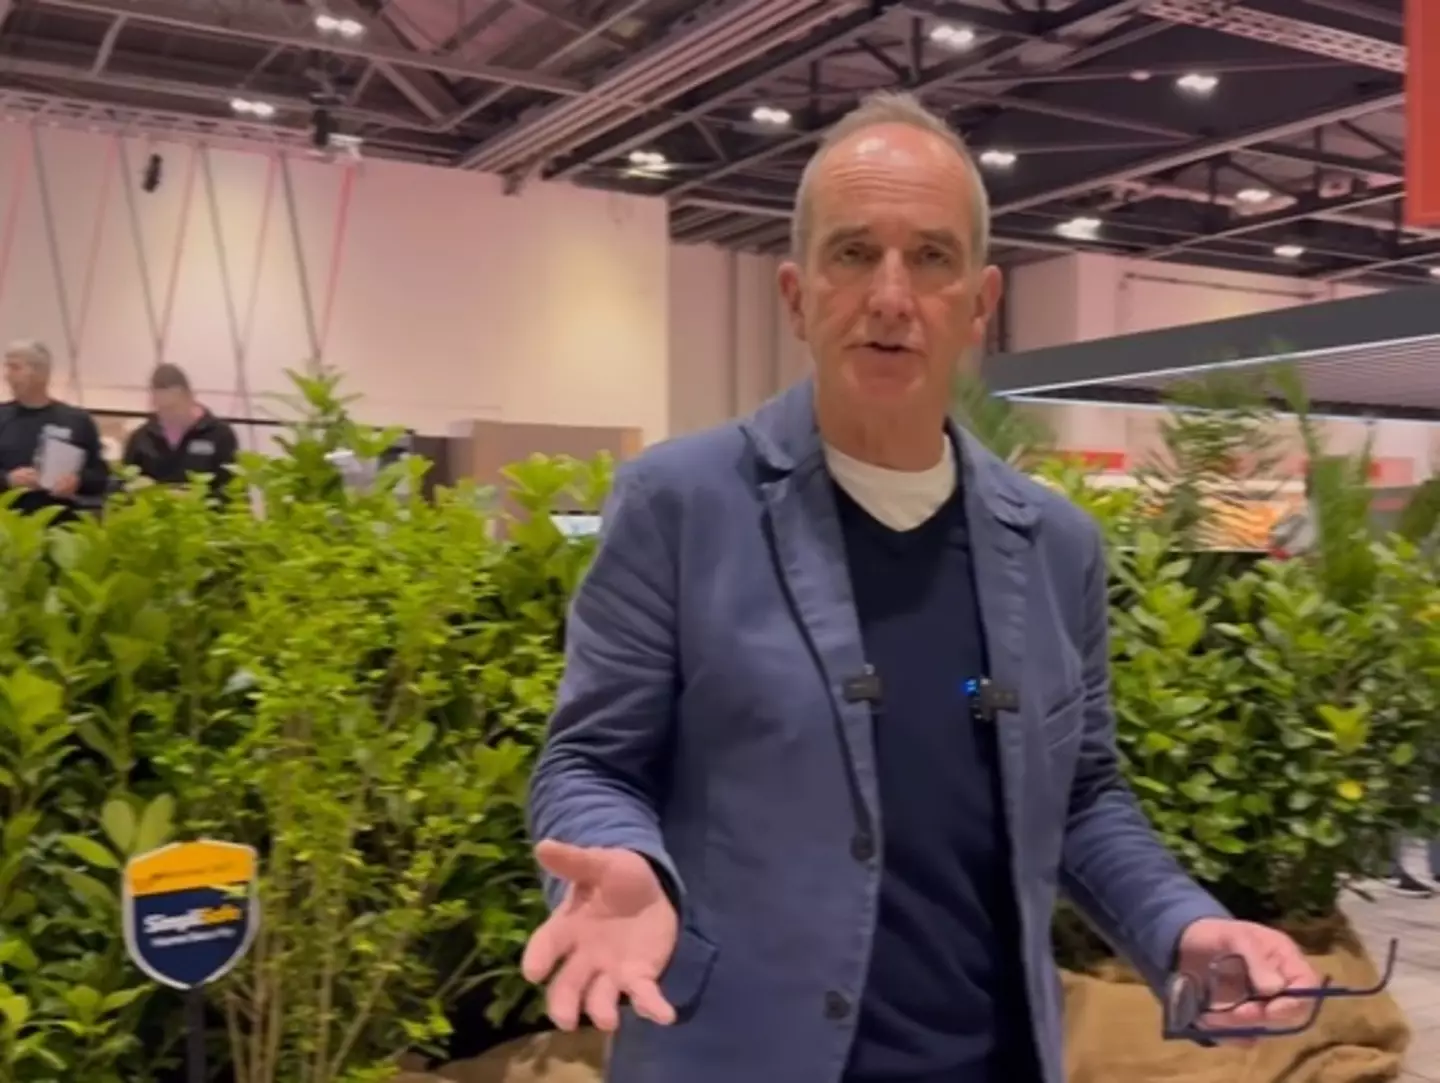 Kevin McCloud at Grand Designs Live, where he spoke about Chesil Cliff House once more. (Instagram/@granddesignstv)